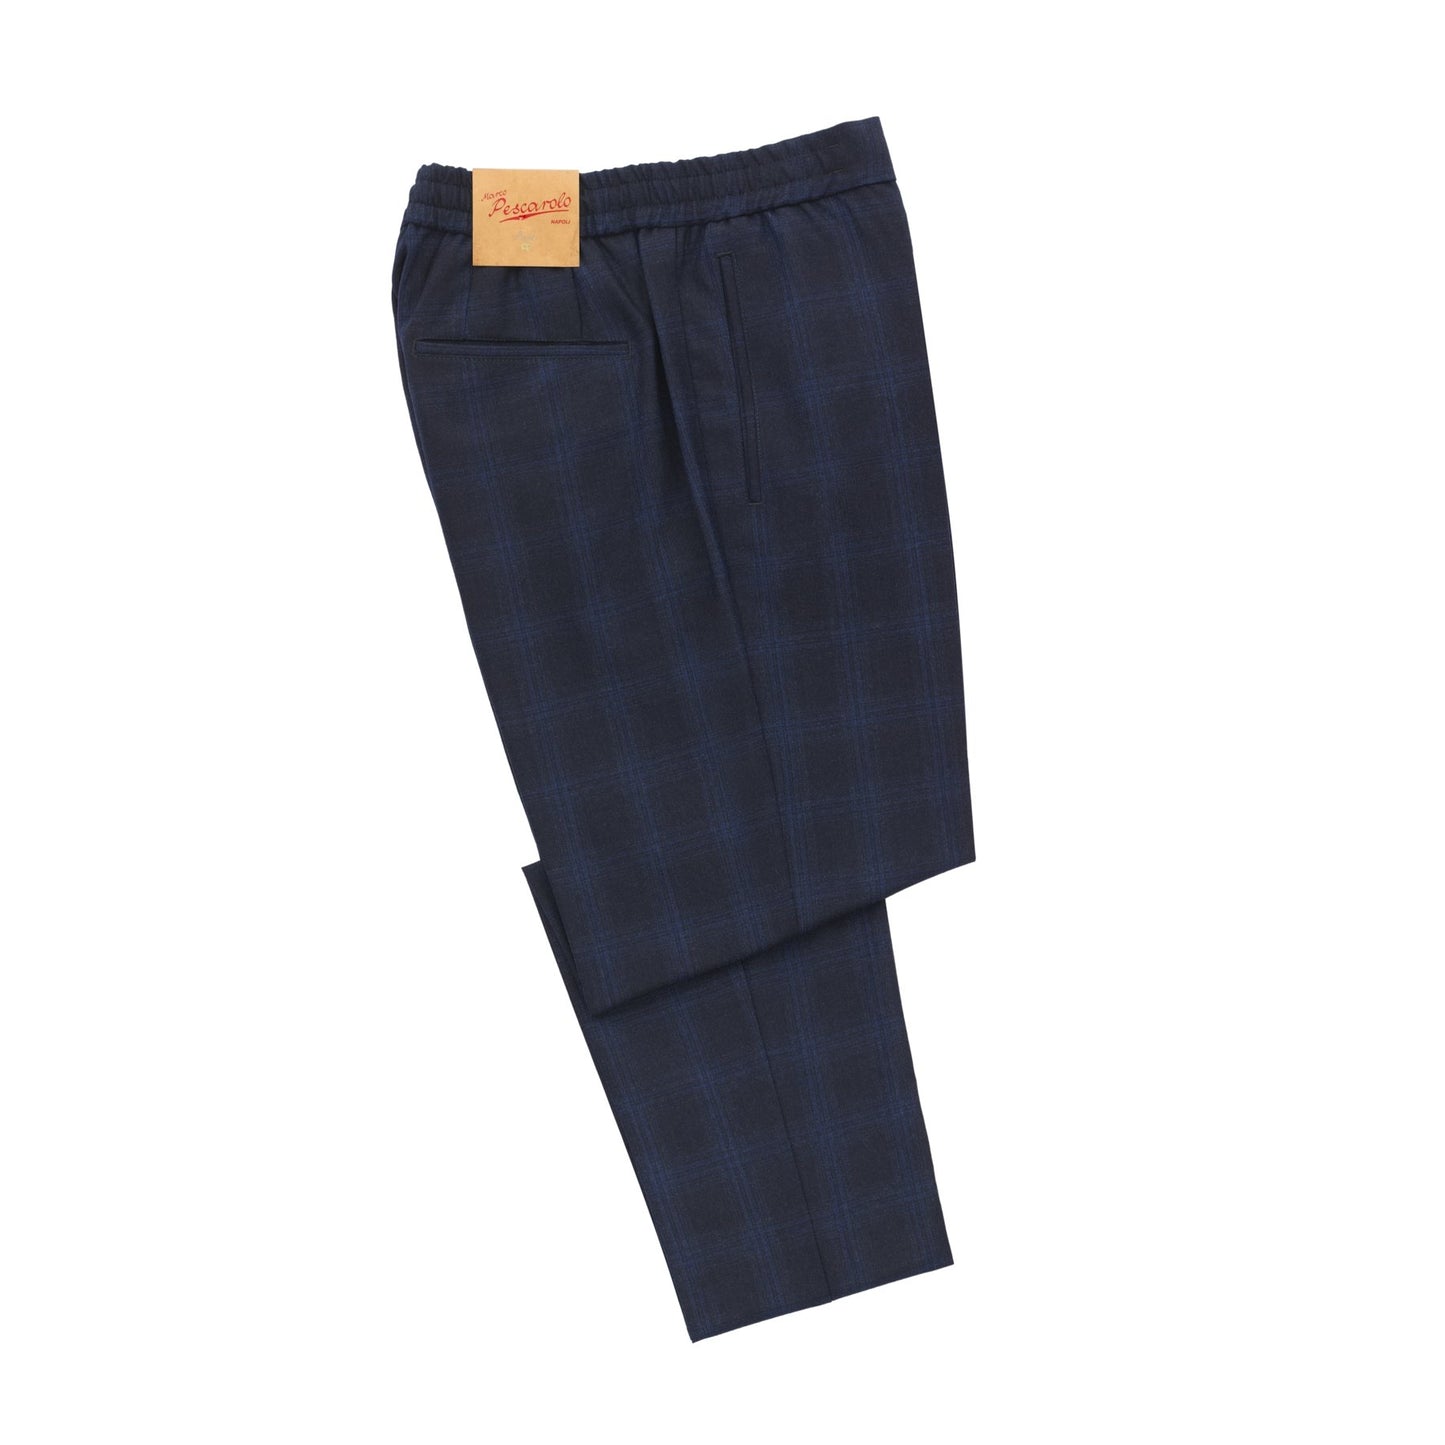 Marco Pescarolo Slim-Fit Virgin Wool and Cashmeres-Blend Checked Trousers in Dark Blue - SARTALE